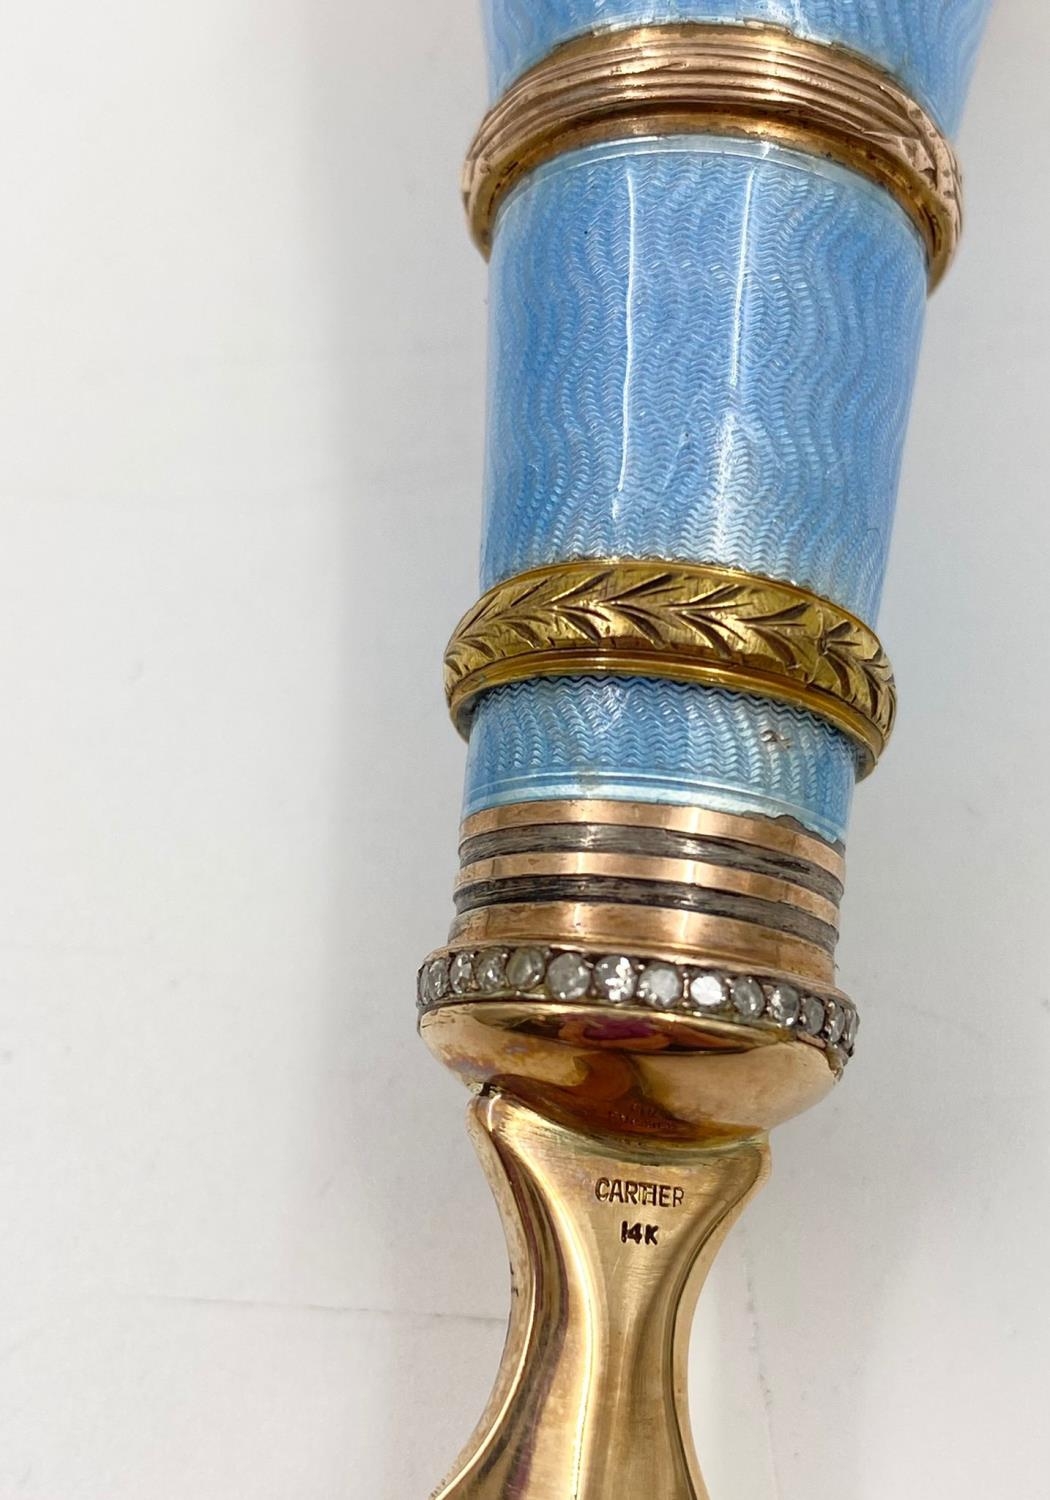 A 14K Yellow Gold, Diamond, Enamel and Jade Cartier Letter Opener. Cartier hallmarked on base of - Image 3 of 4